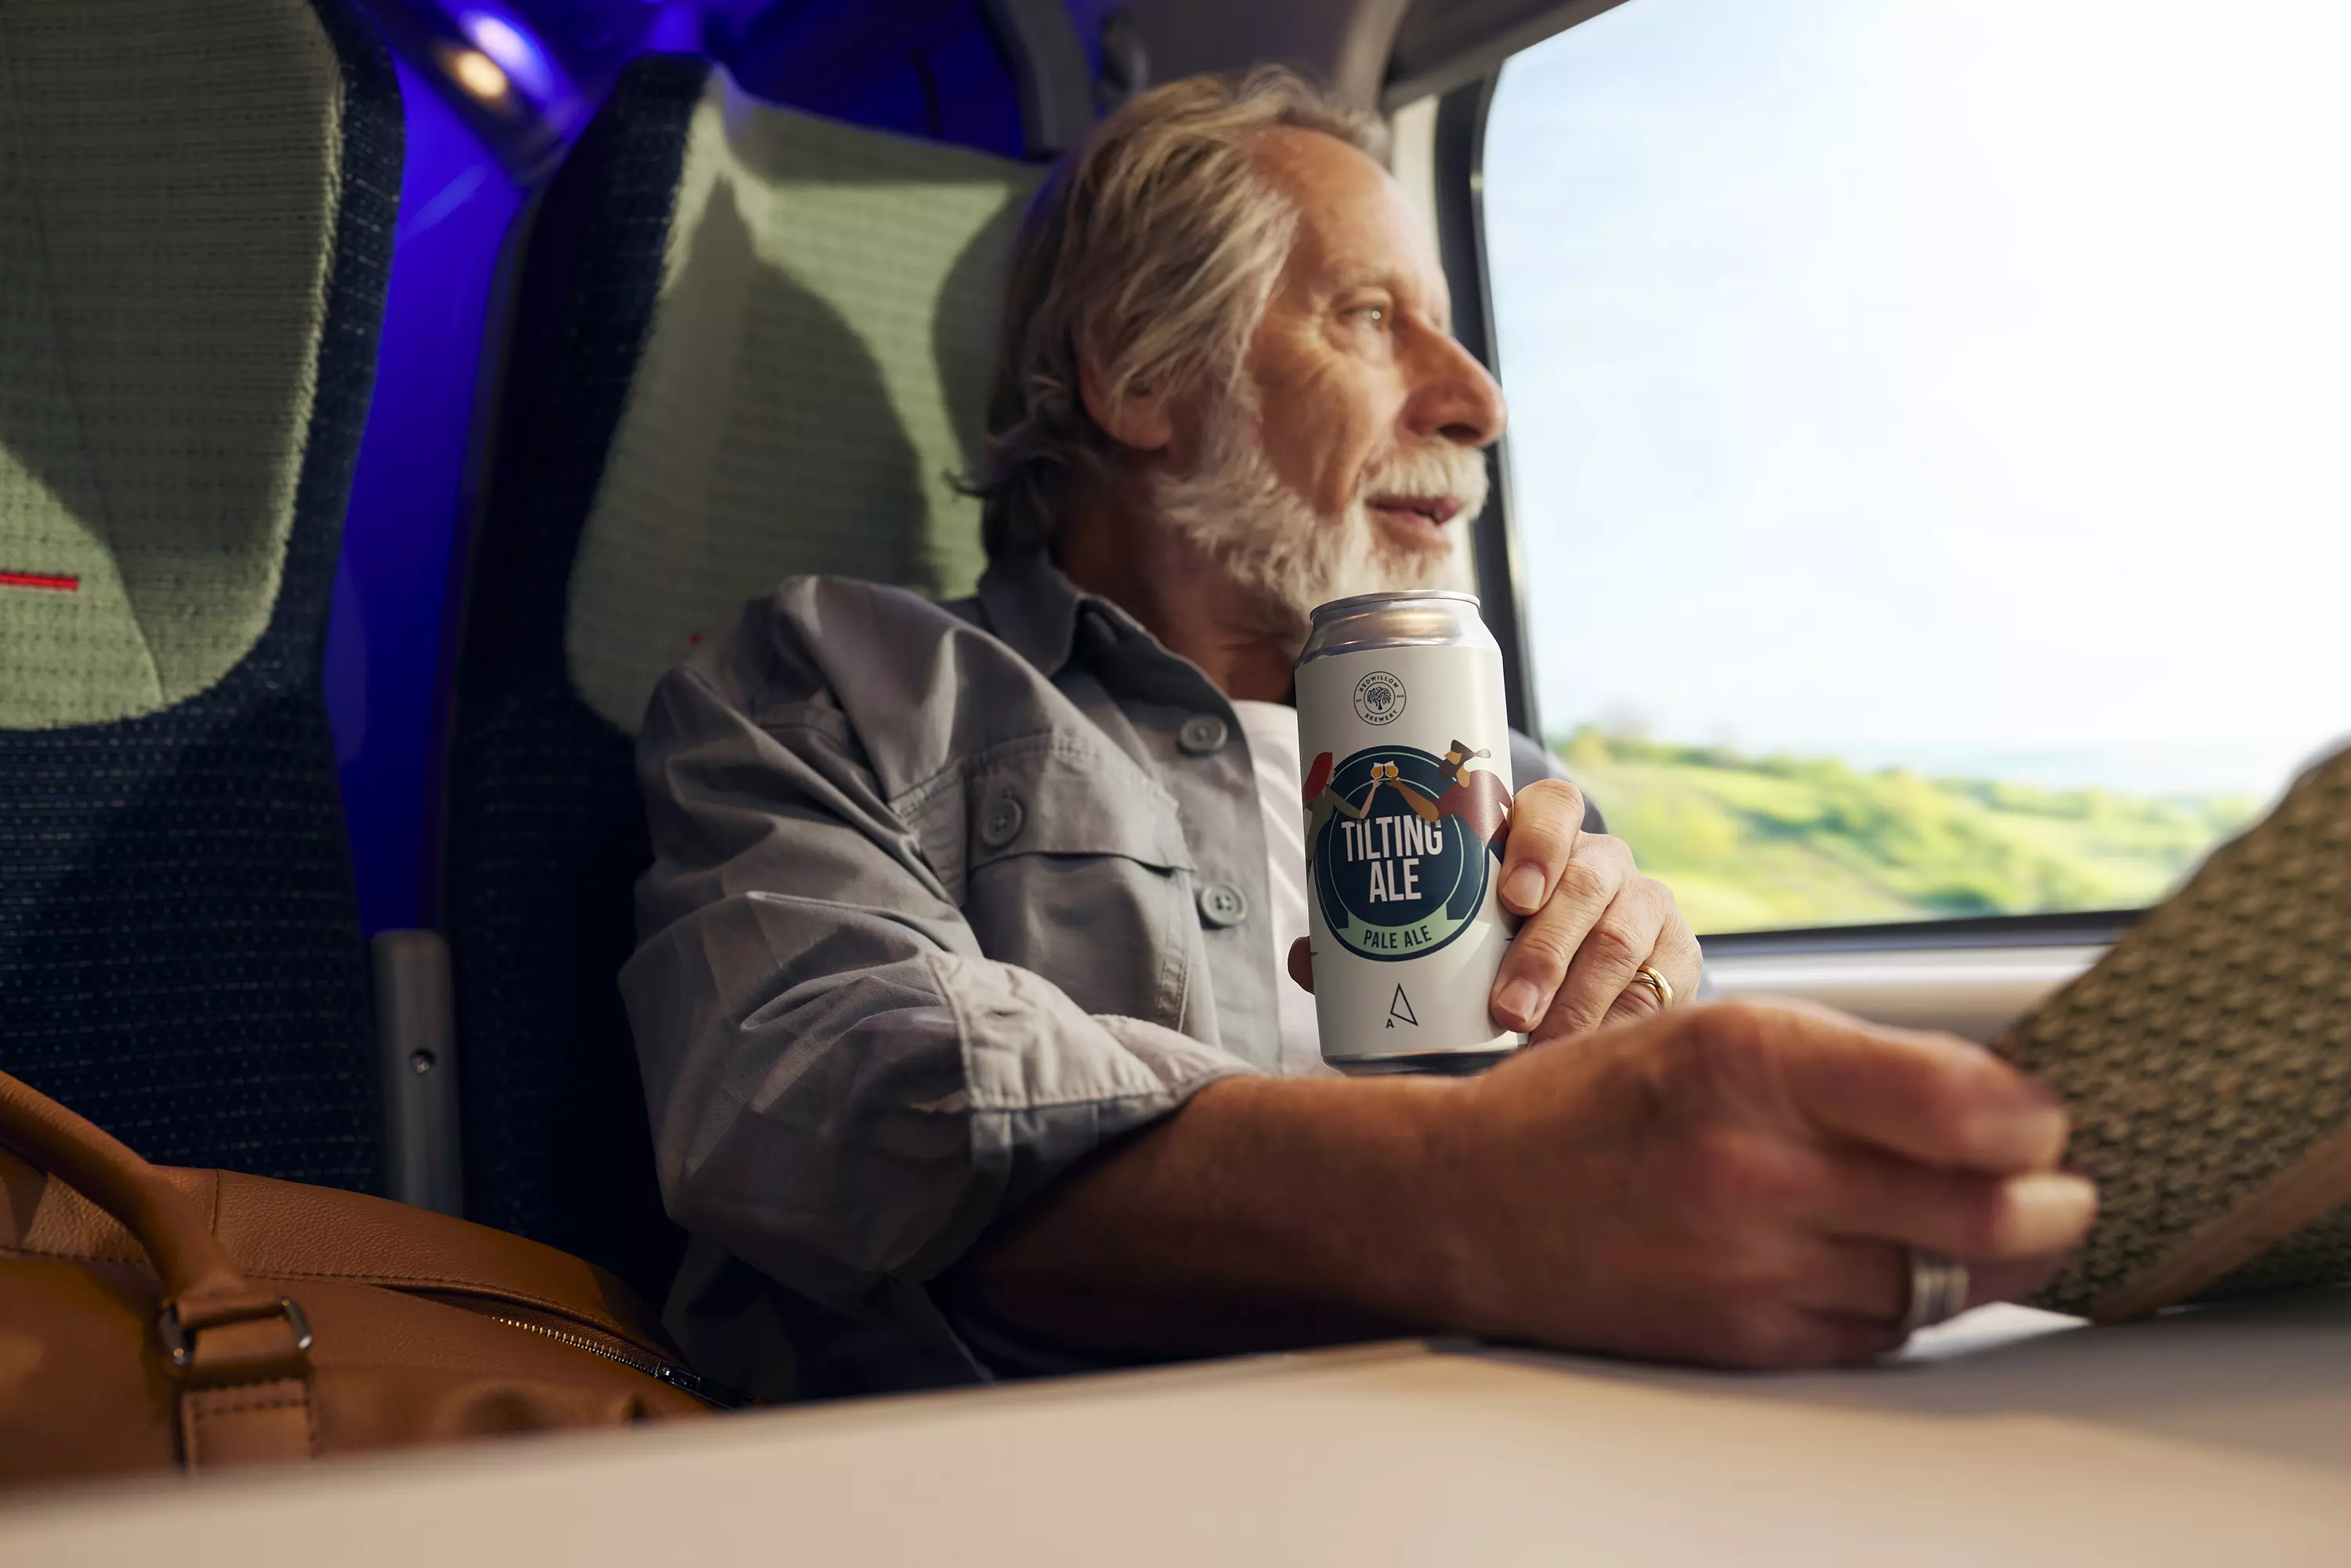 A person sitting in a train holding a can